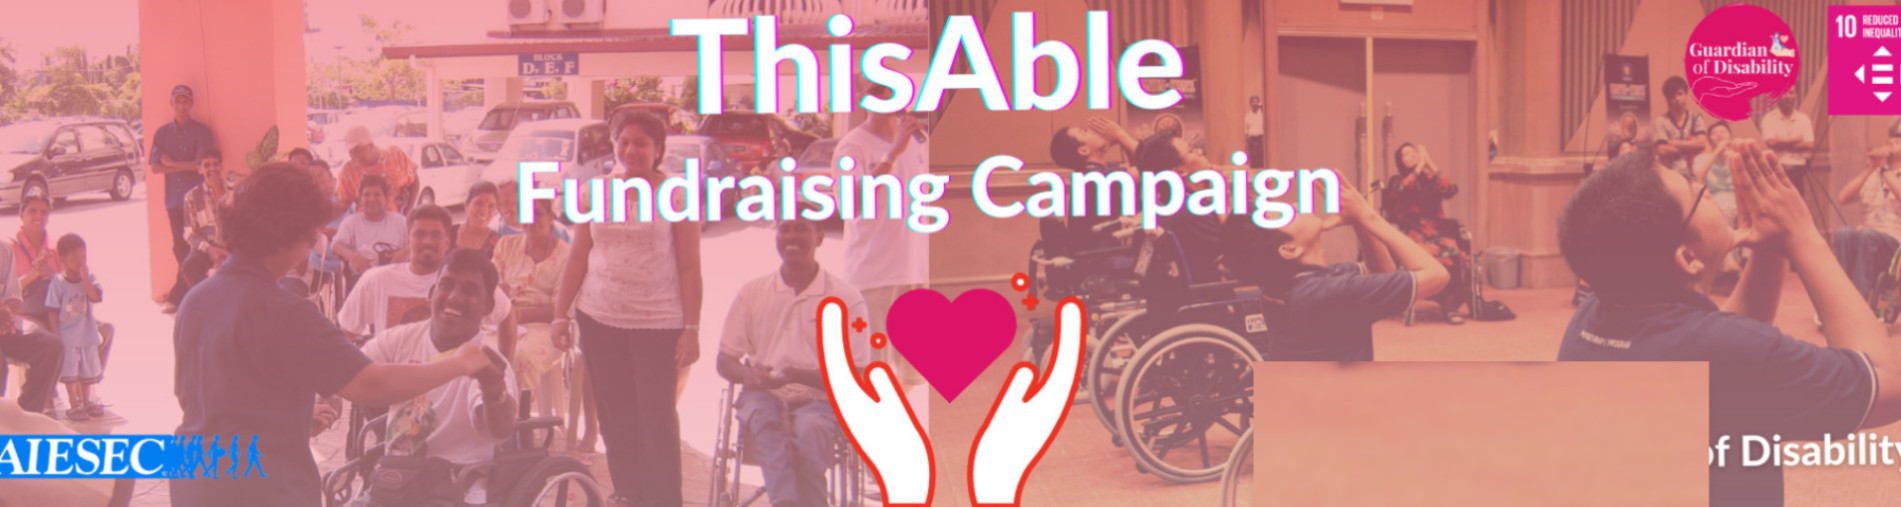 ThisAble for Disabled community